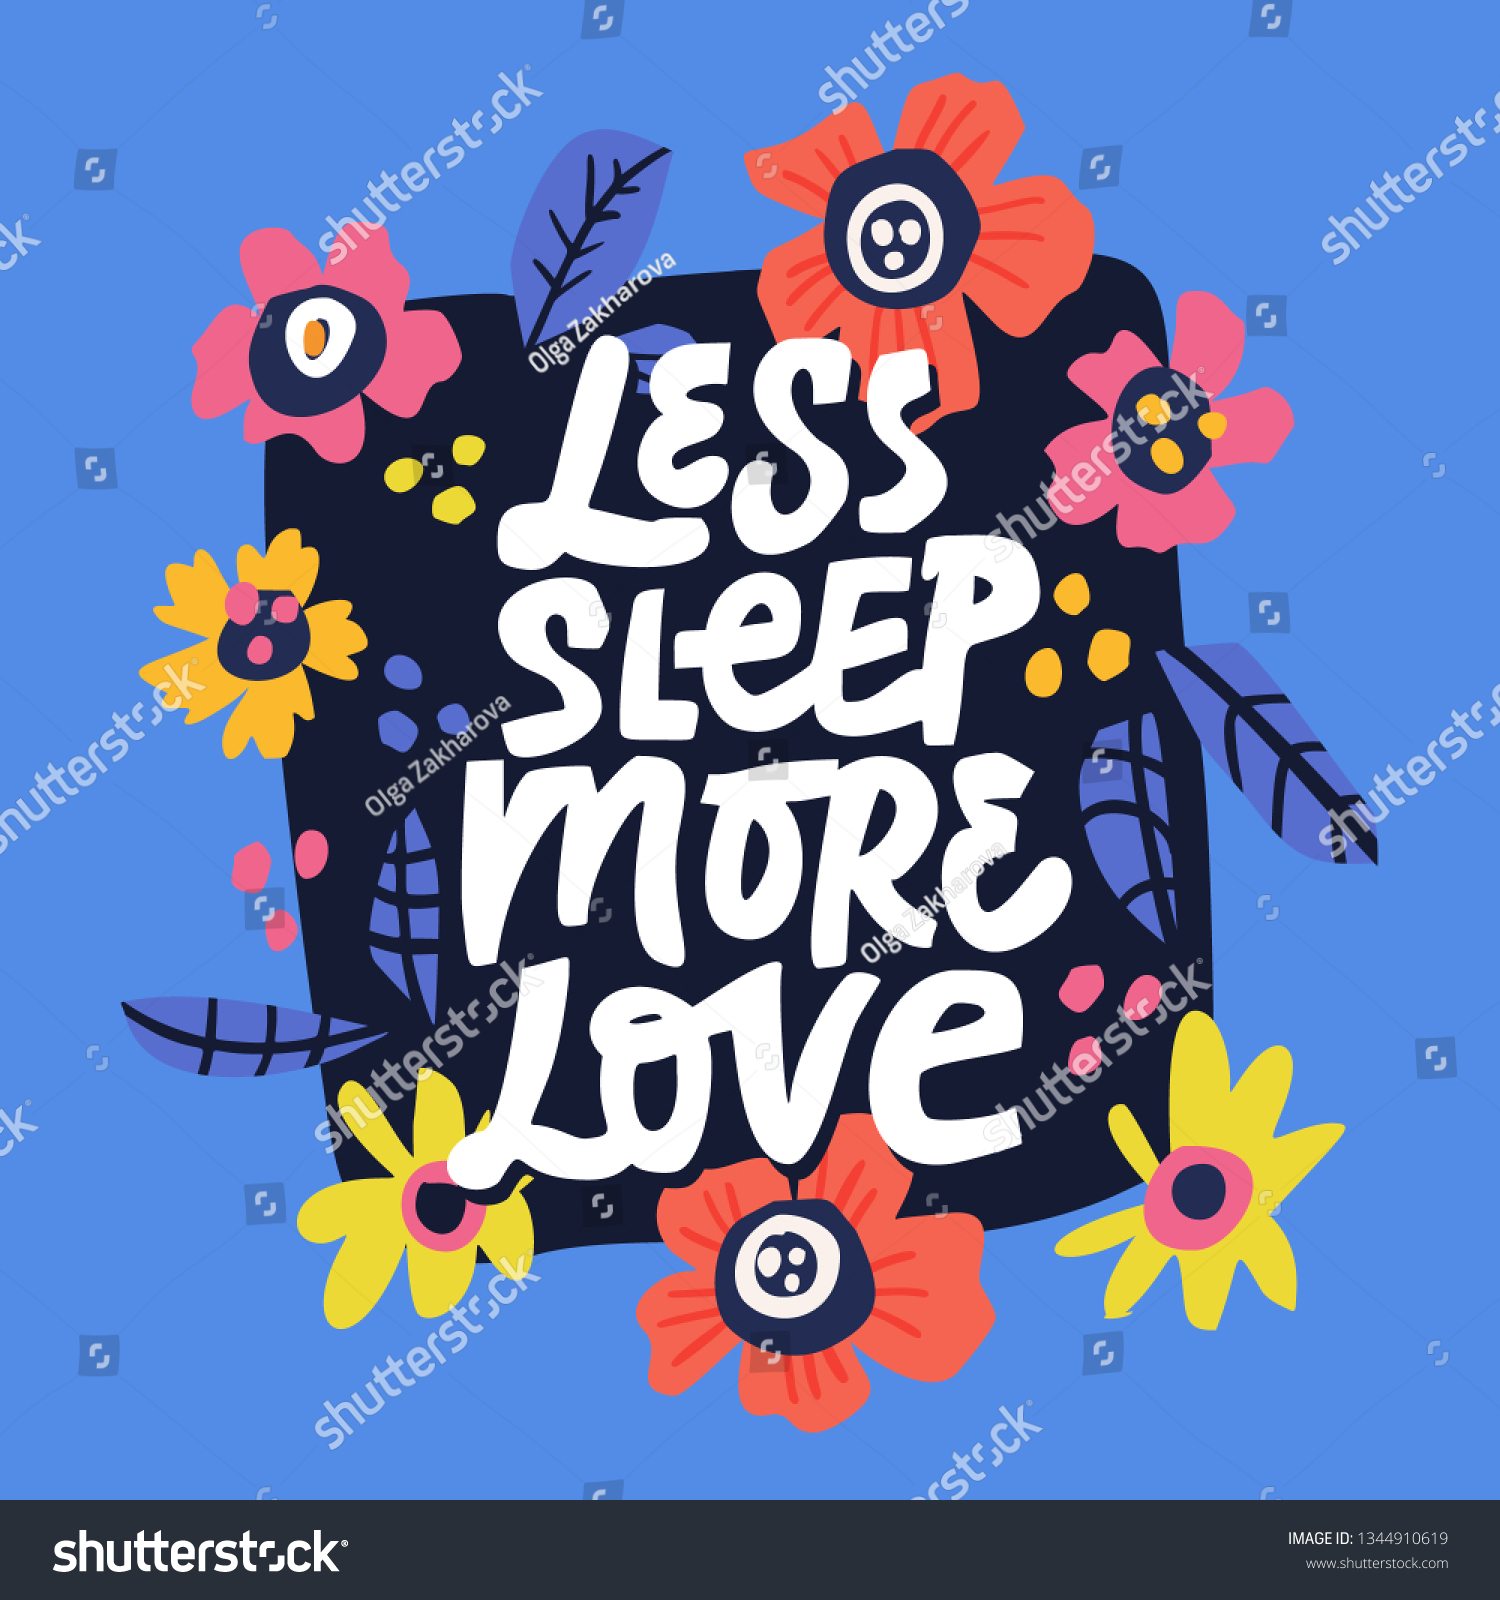 SVG of Motherhood slogan inscription on blue background. Less sleep more love hand drawn lettering in round floral border. Pregnancy phrase sketch drawing. Circle frame with blossom and quote composition svg